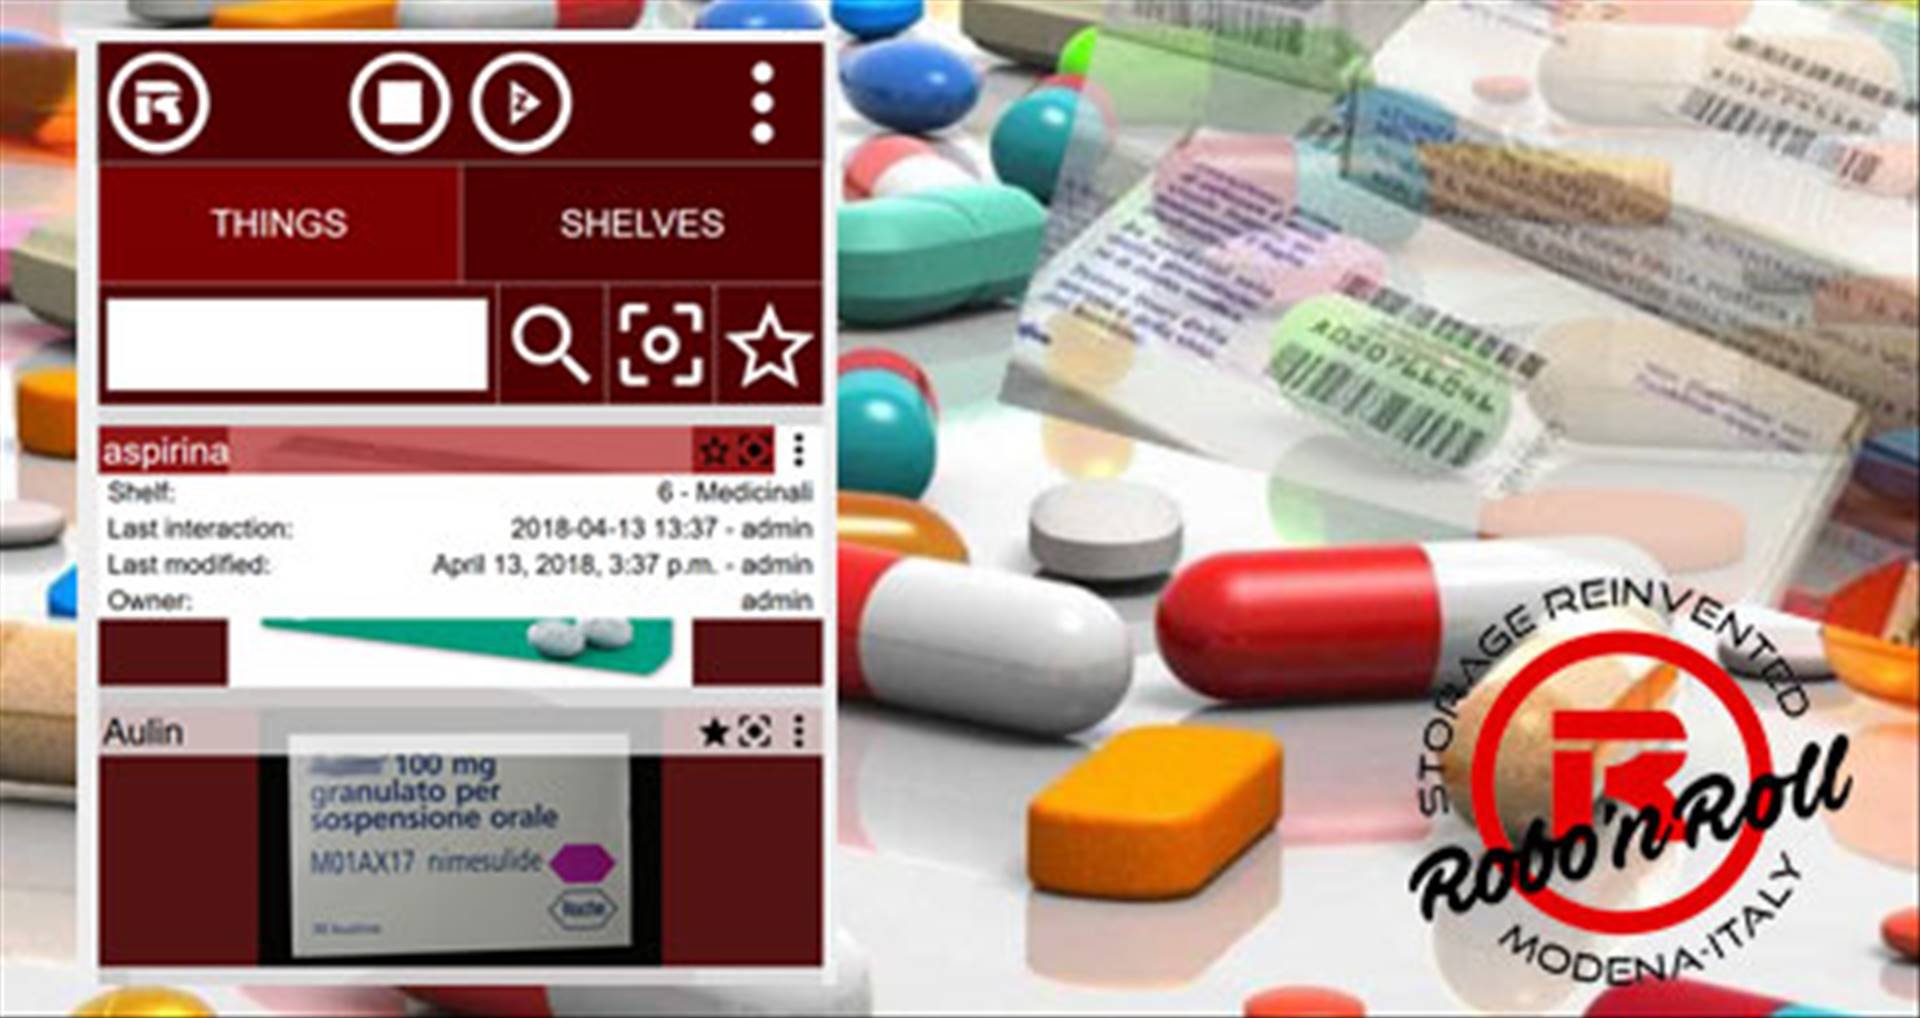 Robo's APPlication lets you classify every drug: expiration dates, active ingredients, price...